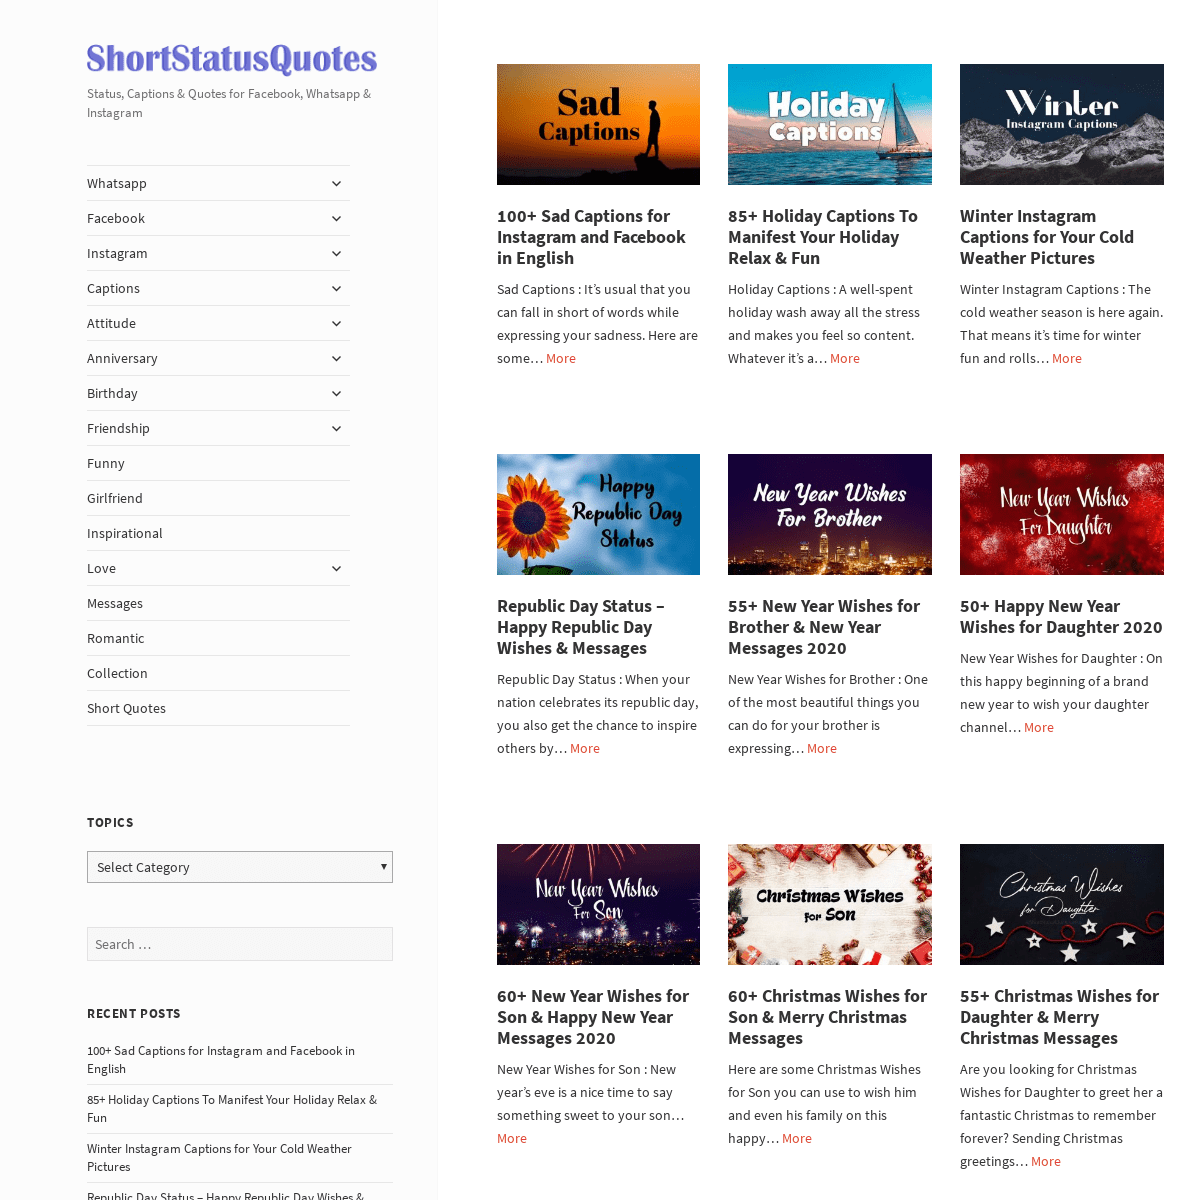 A complete backup of shortstatusquotes.com